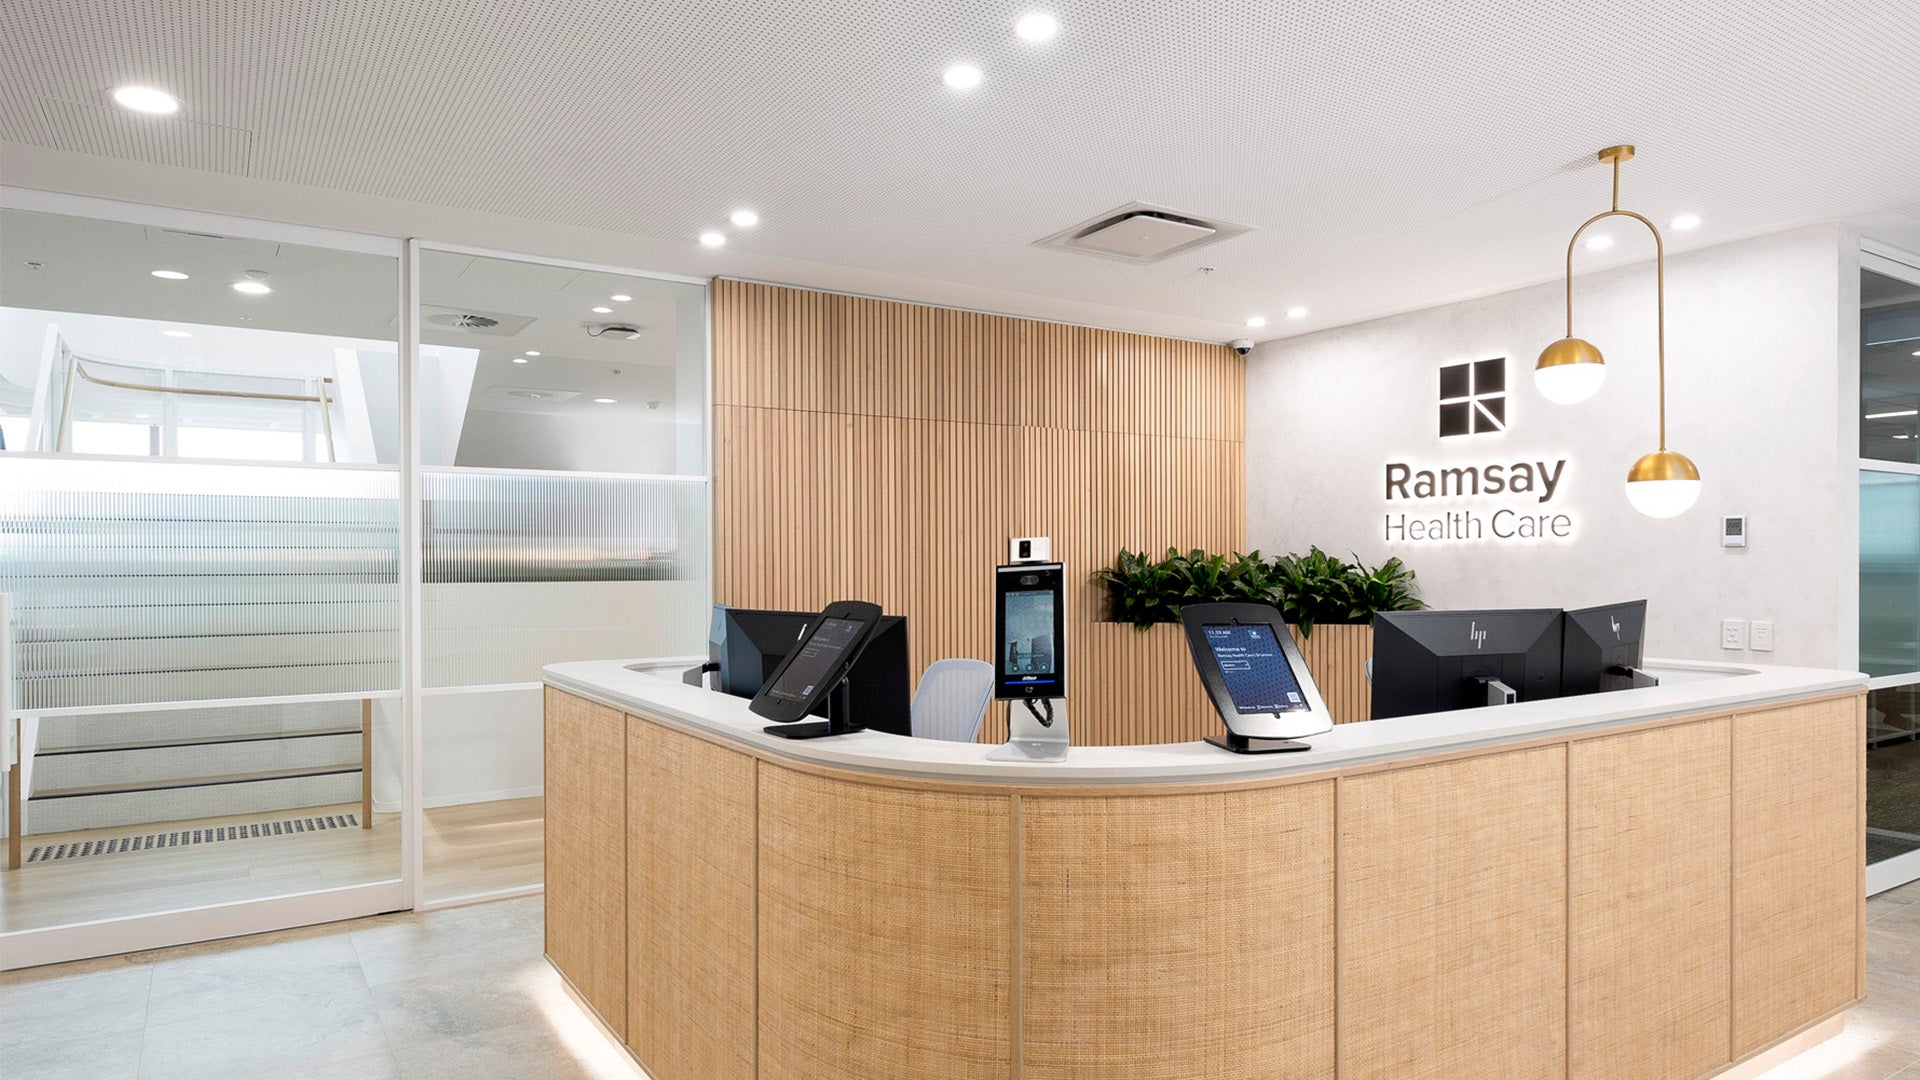 Ramsay Heathcare was established in Sydney in 1964, Ramsay Health Care is a global health care company with reputation for operating high-quality services and delivering excellent patient care.